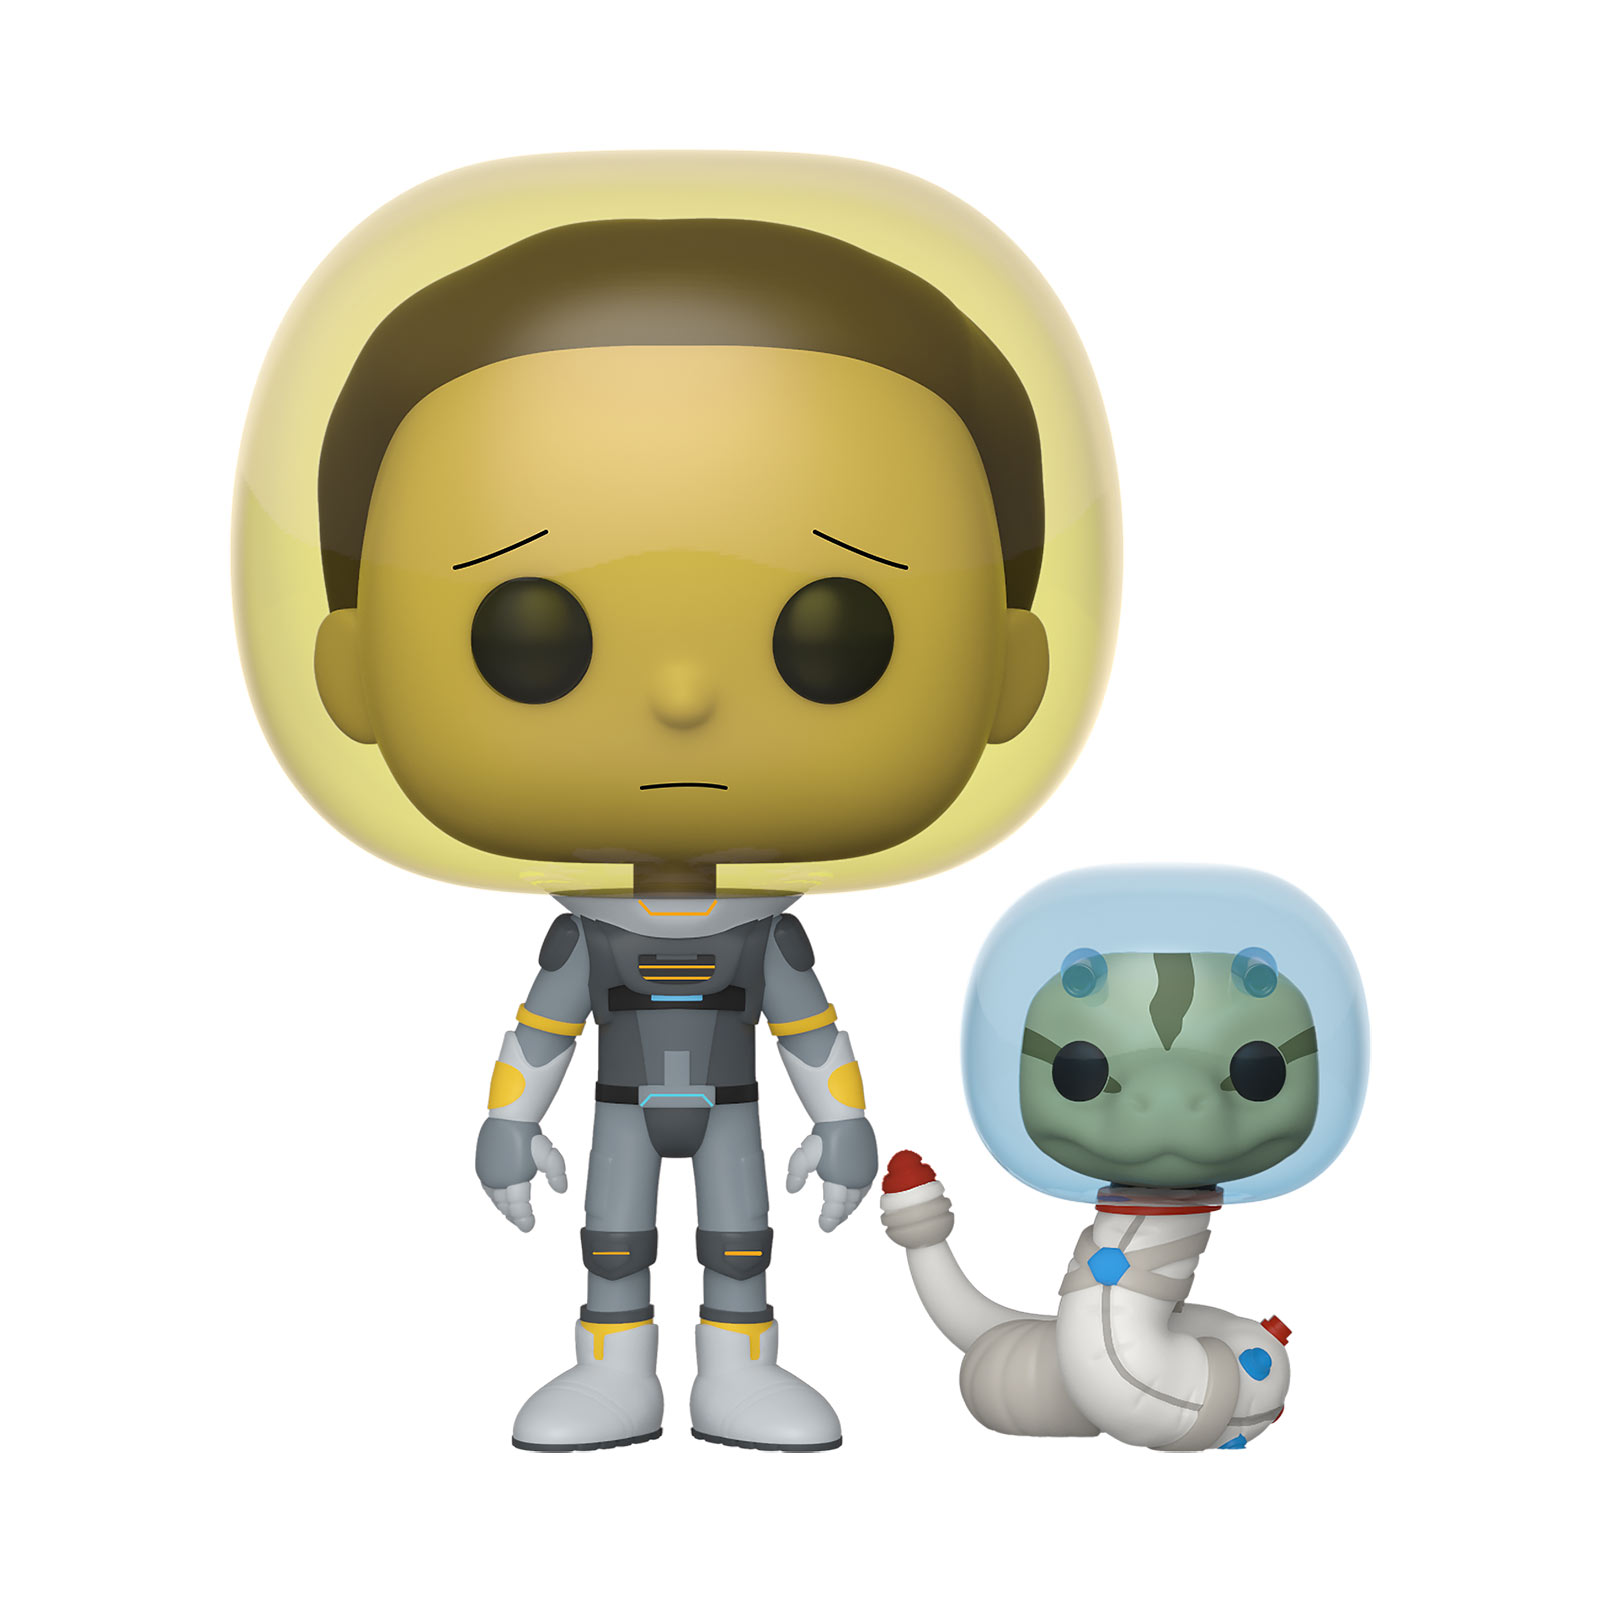 Rick and Morty - Space Suit Morty With Snake Figurine Funko Pop